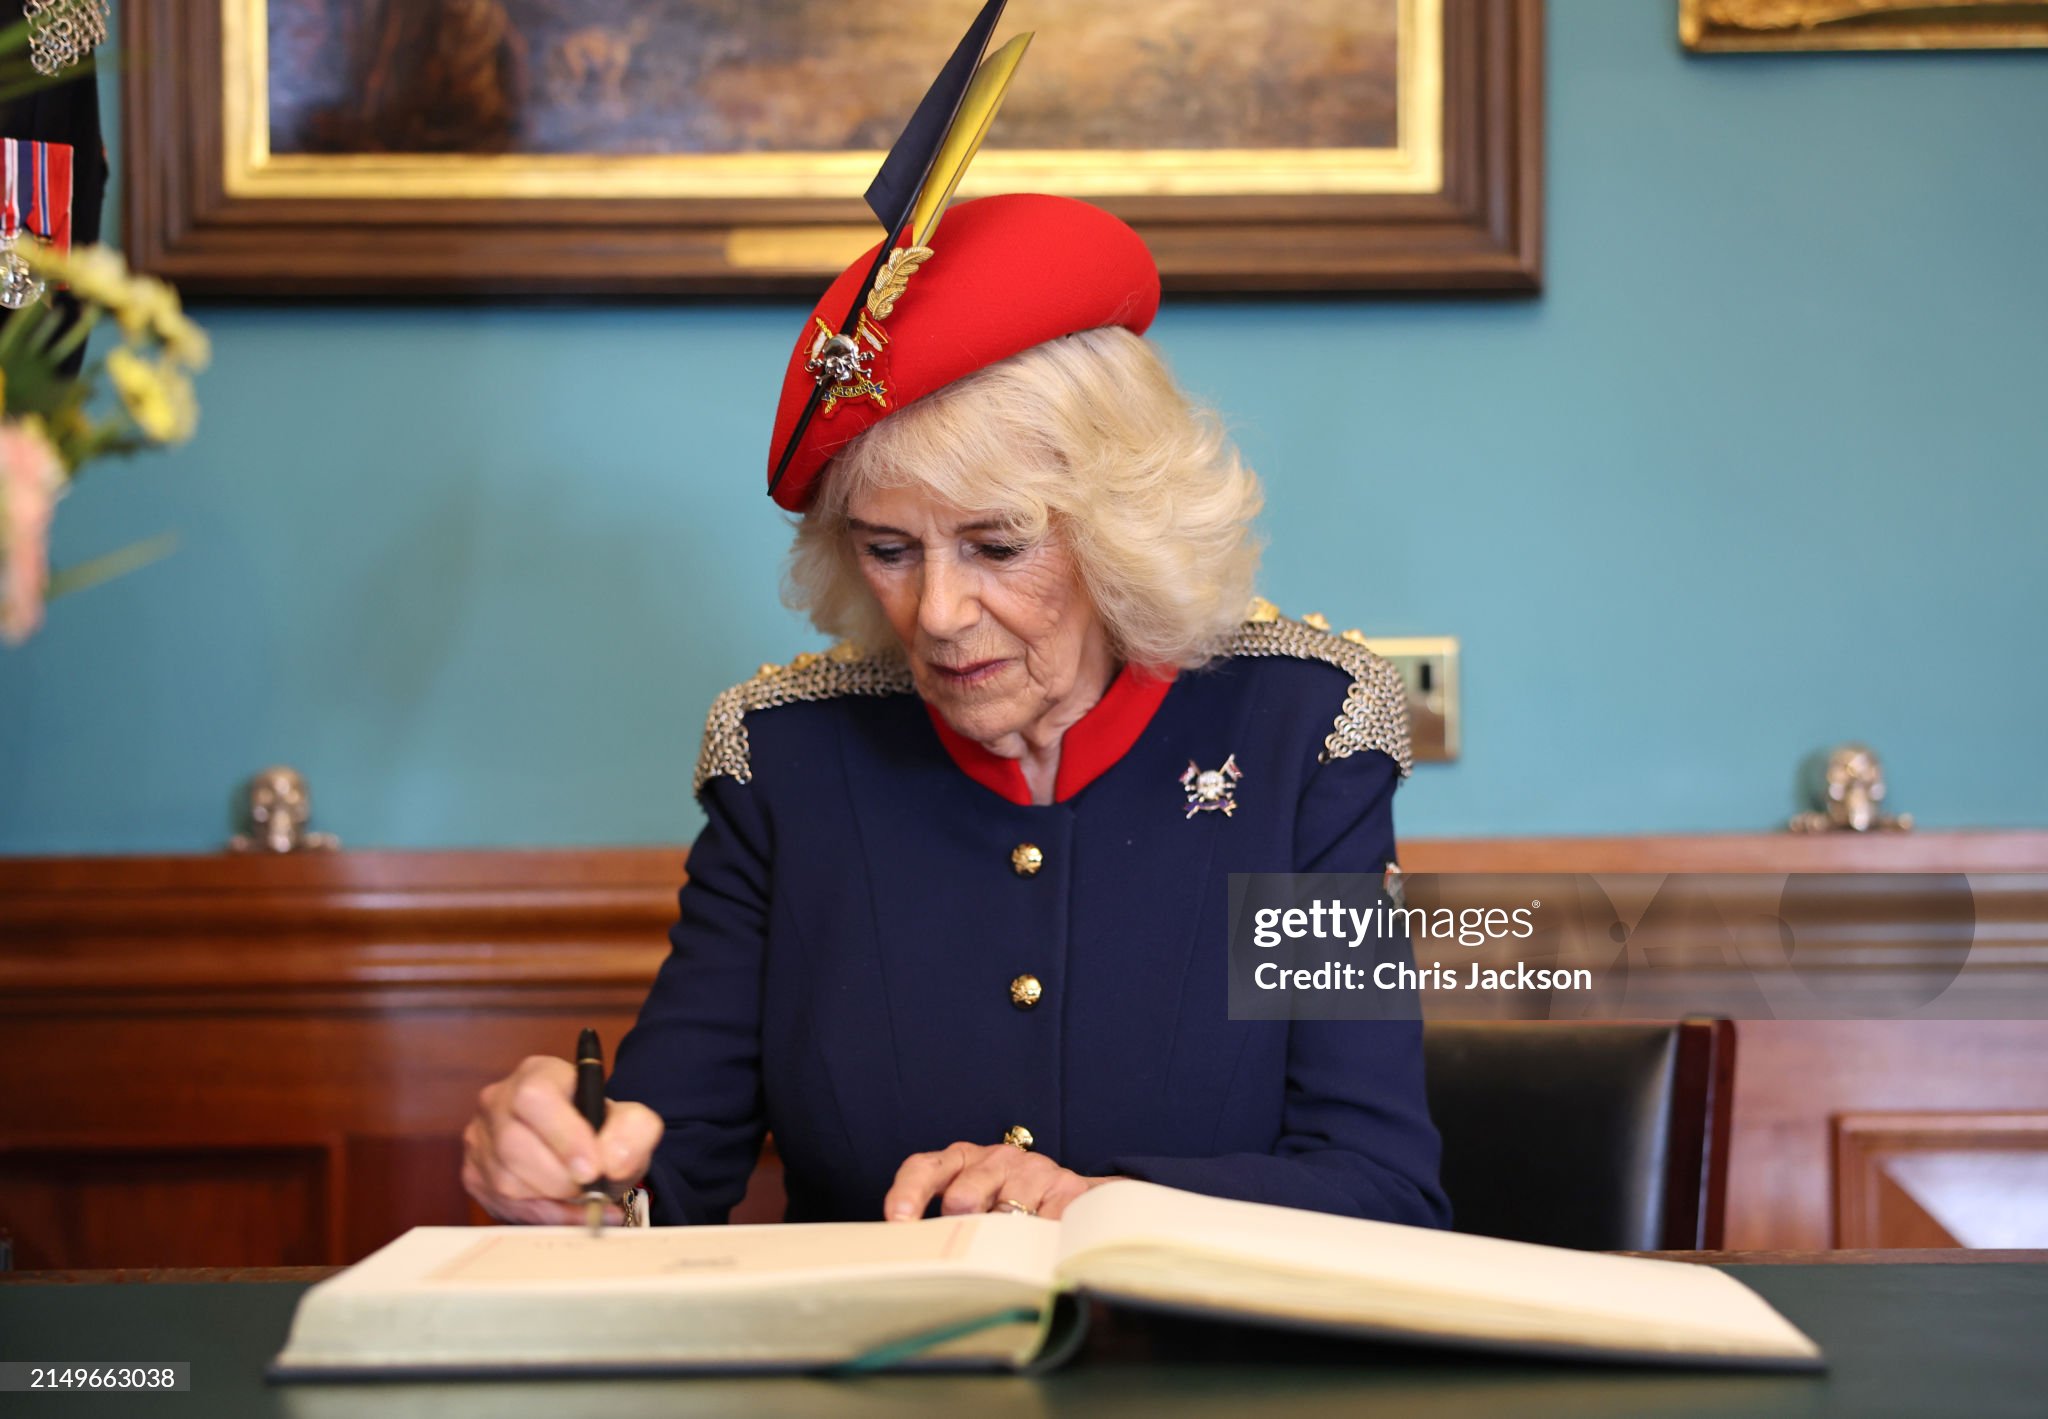 queen-camilla-visits-the-royal-lancers-in-north-yorkshire.jpg?s=2048x2048&w=gi&k=20&c=4BFpKM1NSsH3-oRFaObMxRwIPxPbjrxVP0kunzikIV0=